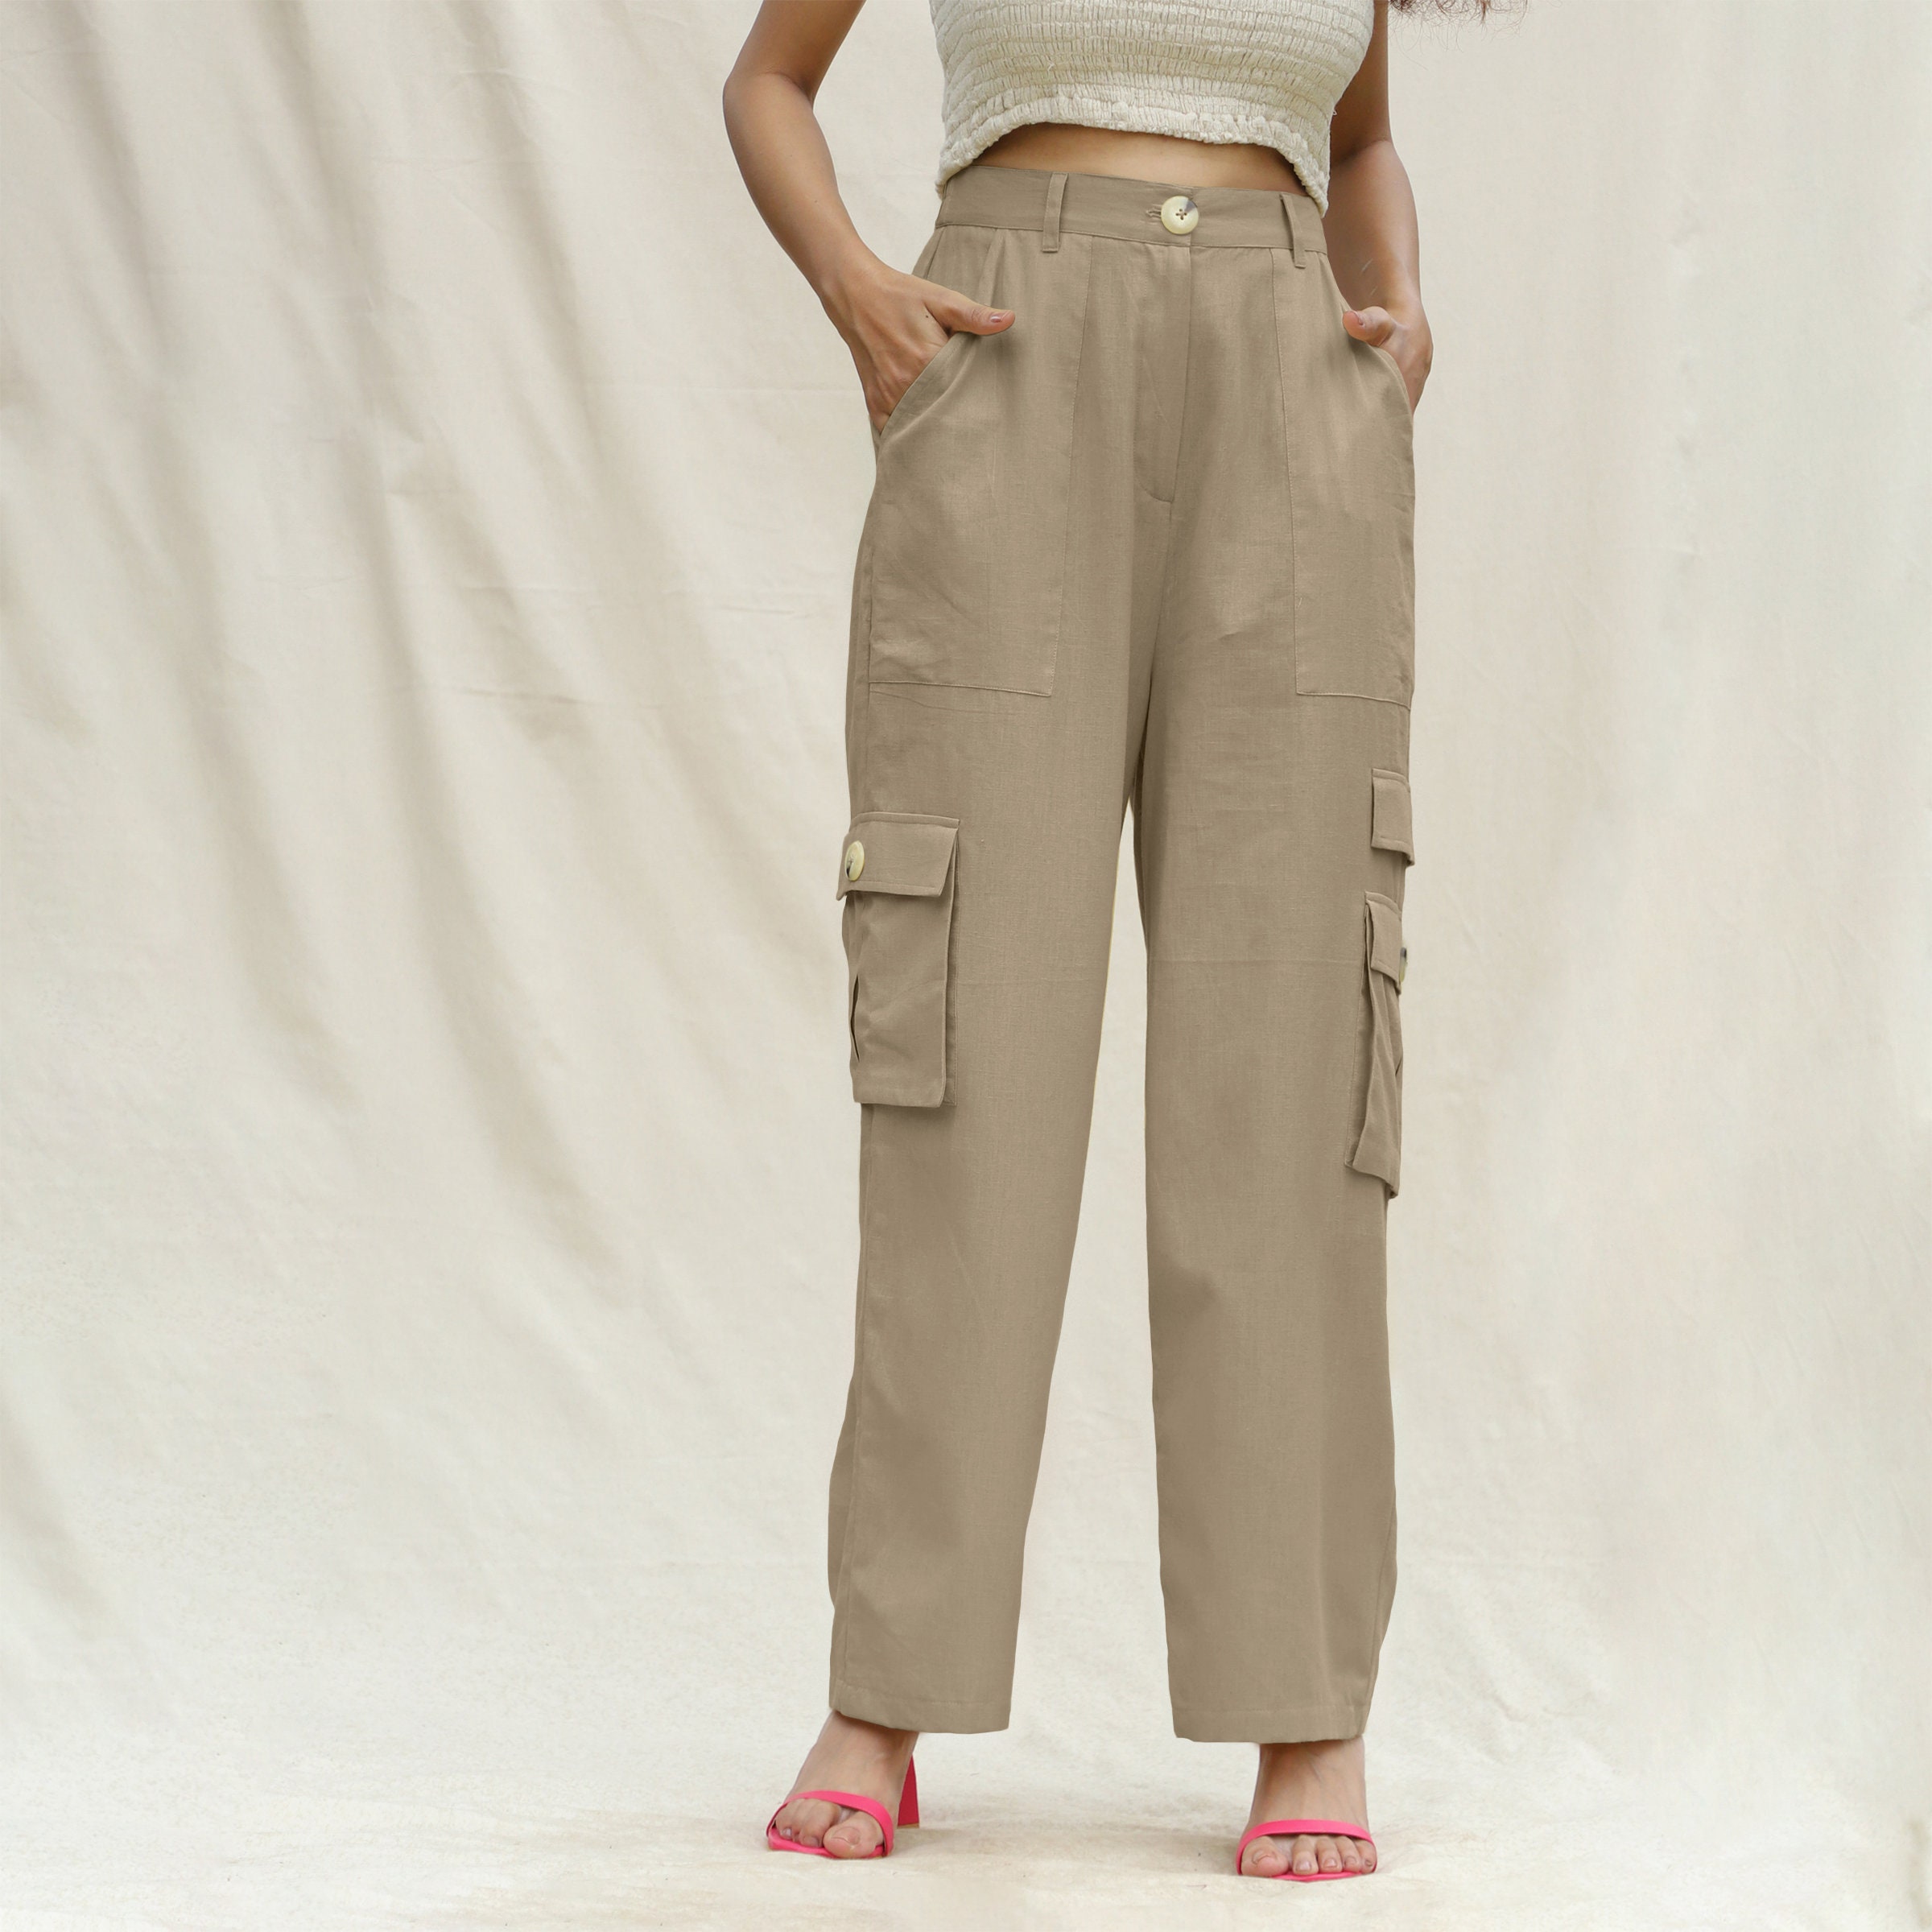 Olive Green Cotton Flax Elasticated High-rise Cargo Pant, Pant With  Pockets, Women Cargo Pant, Customizable Pant Etsw 